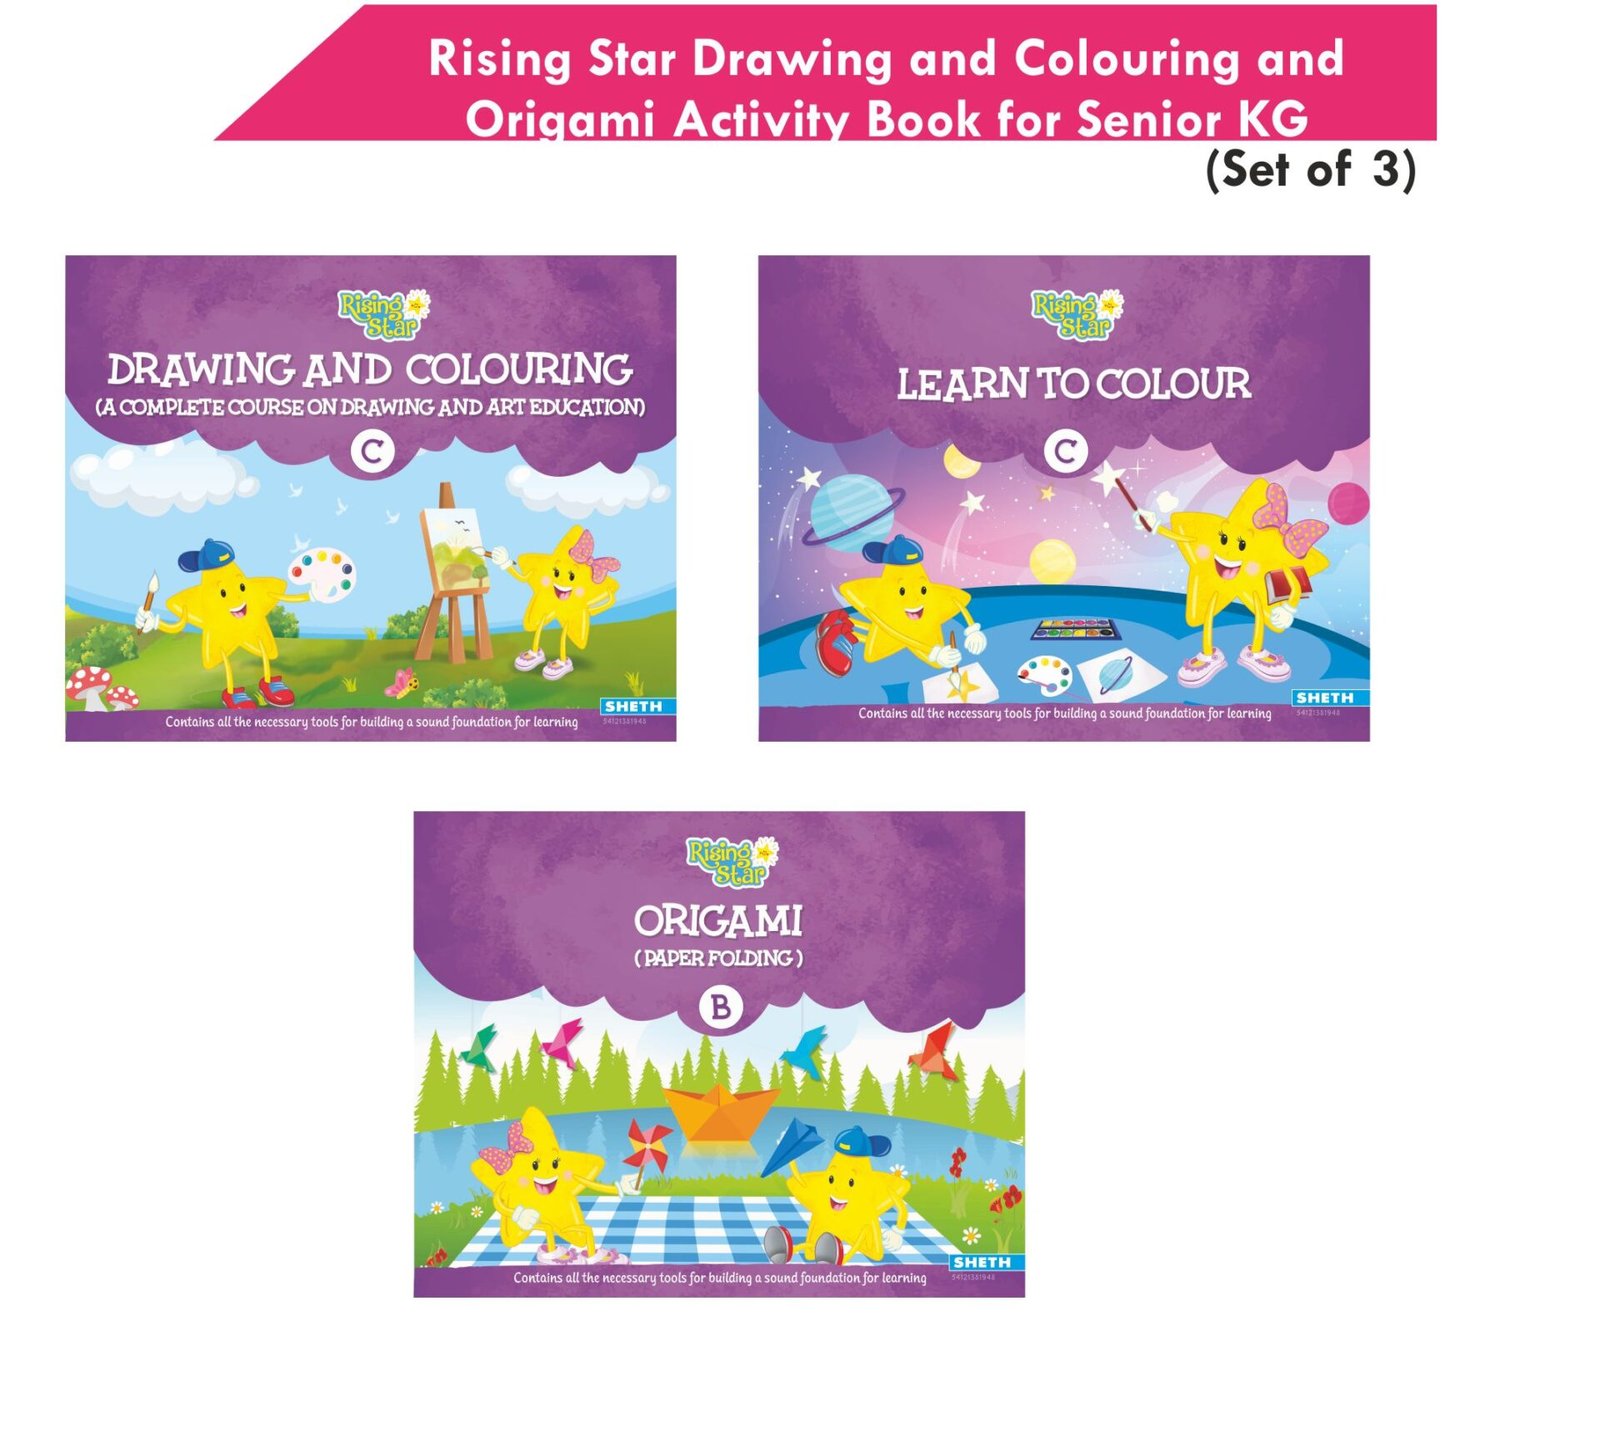 Rising Star Drawing and Colouring and Origami Activity Book for Senior KG Set of 3 1